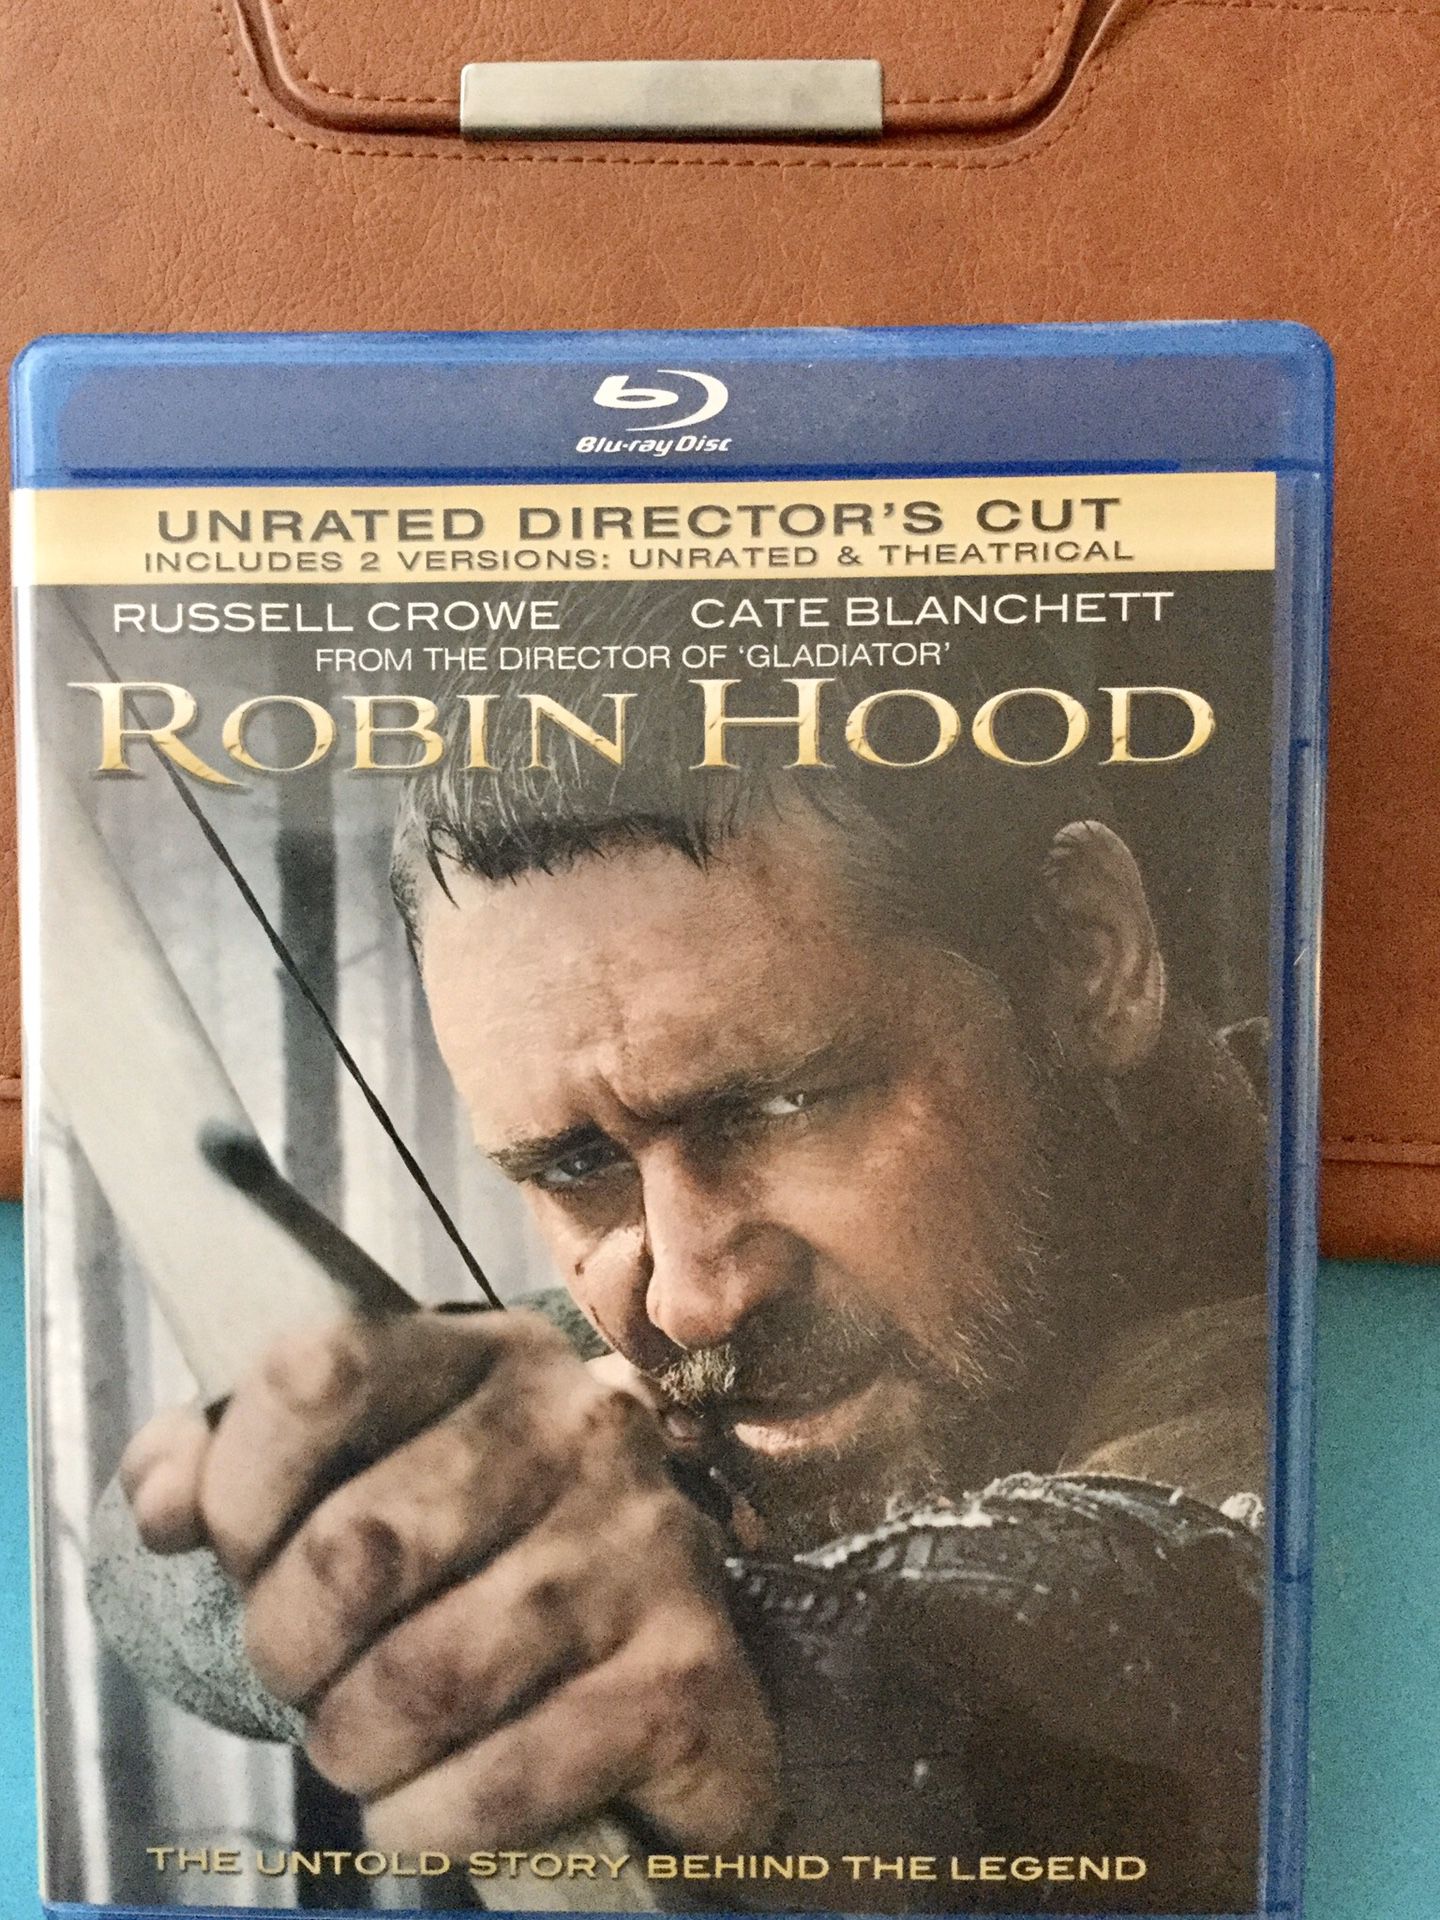 MOVIE 🎥😁 🍿 ROBIN HOOD 3 Blue - Ray DVD ‘s / Check my page for more Movies & Video Games